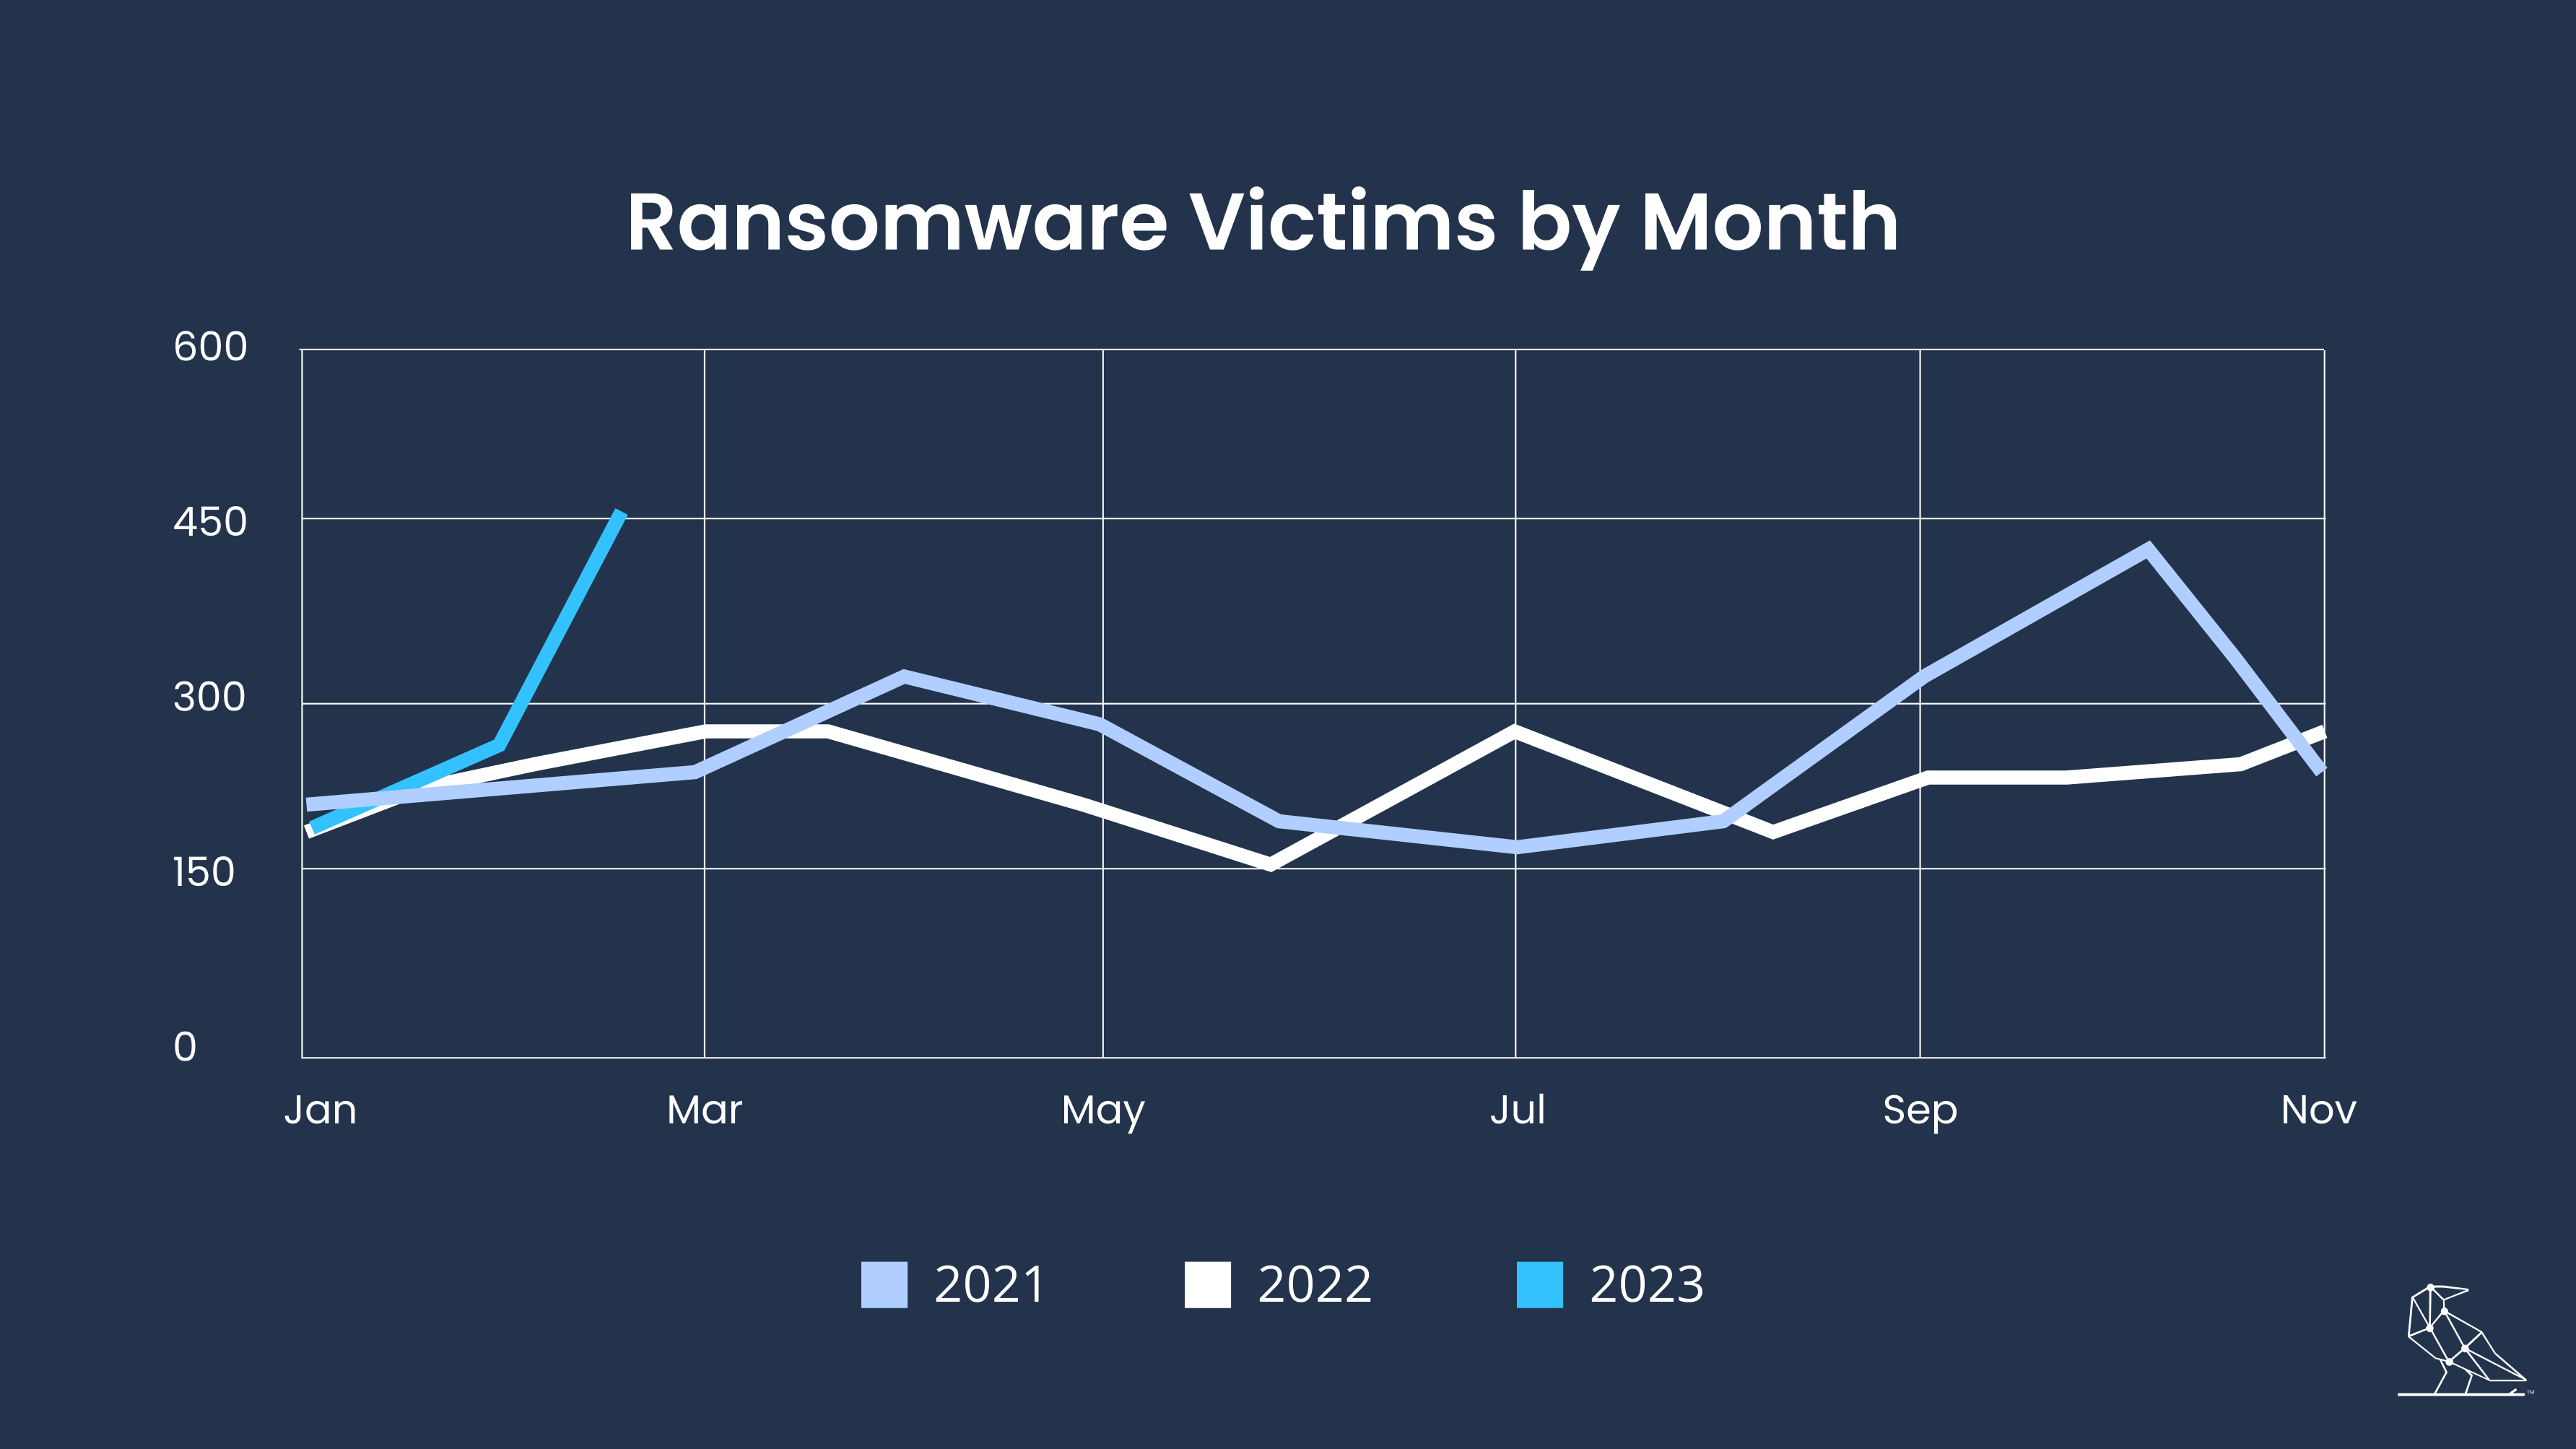 [LINE GRAPH] Ransomware Victims by Month 2021-2023